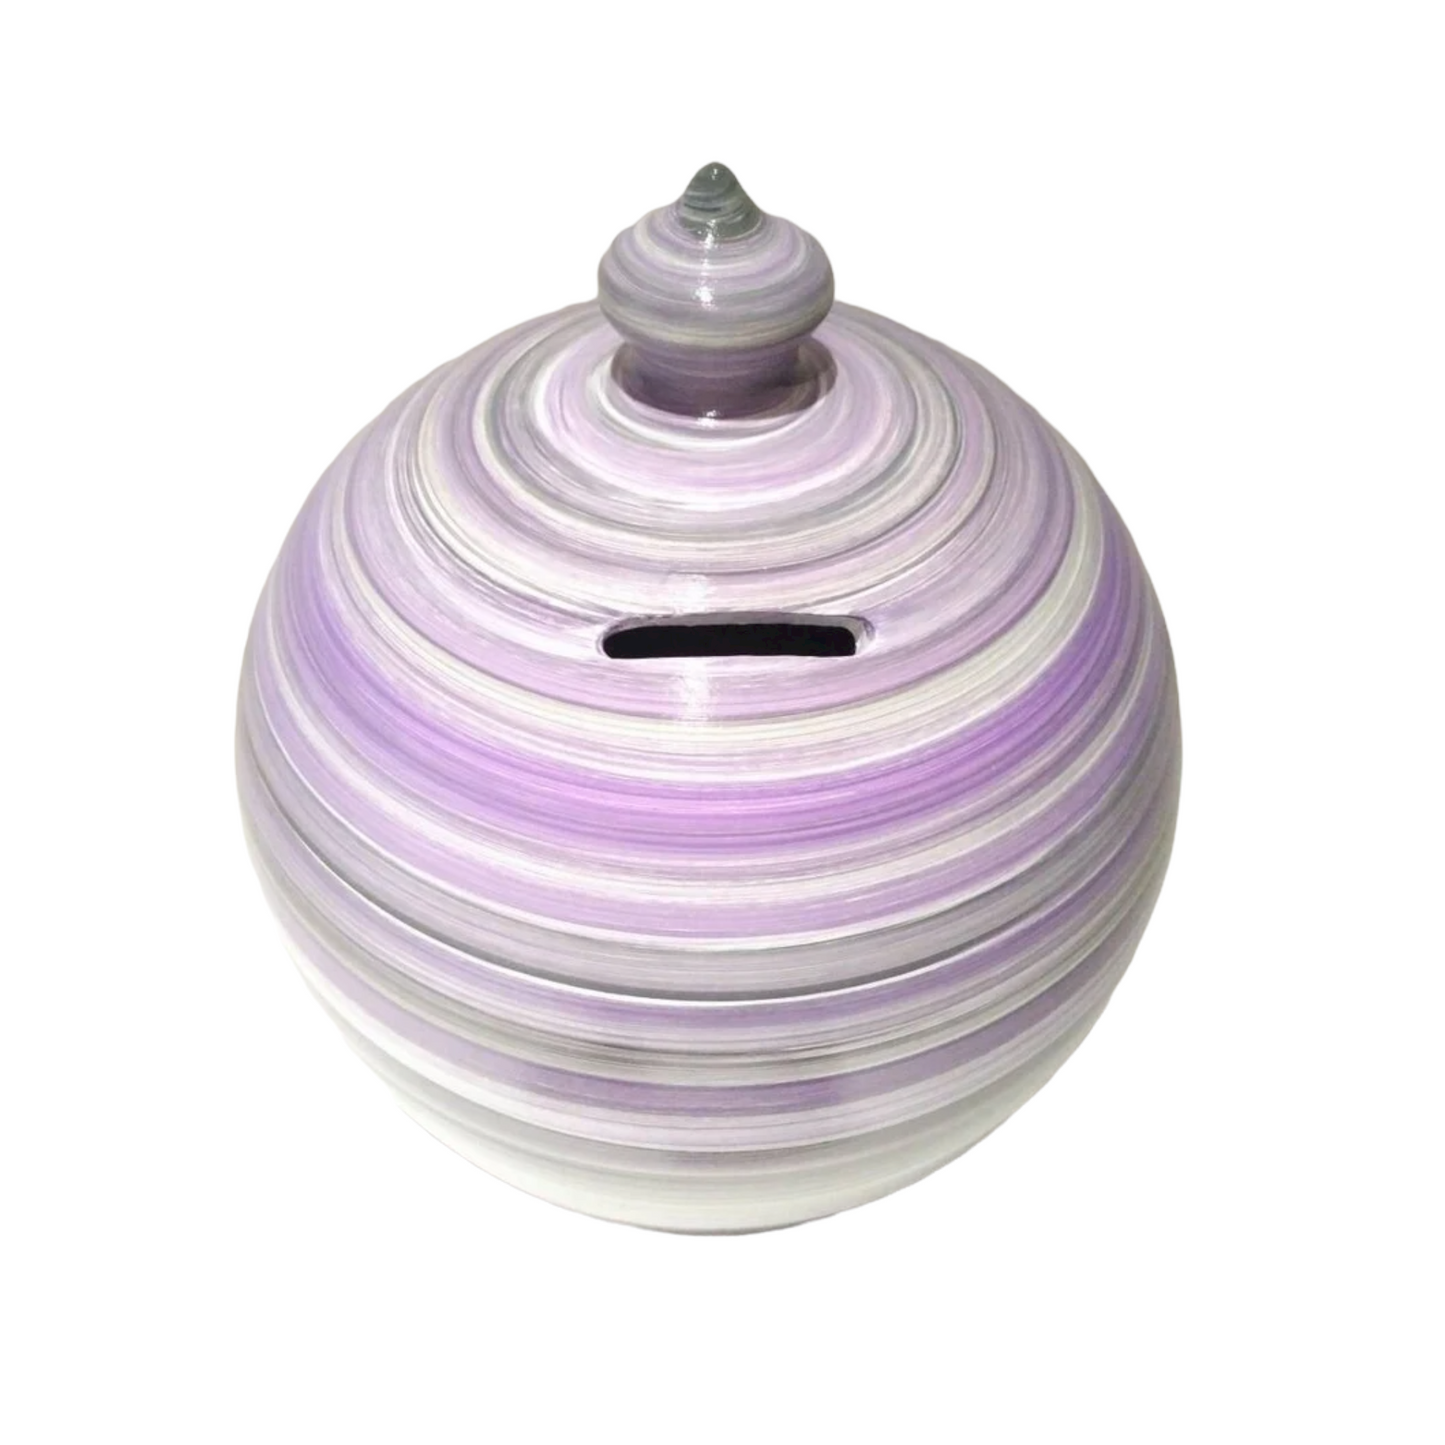 Italian Pottery Piggy Bank. Size: 25 cm = 9.8425 Inches.  Made to order. White, Purple & Gray, as in picture. With hole and stopper plug, or without hole. This item is entirely handmade and hand-painted with acrylic colors, and is signed by me at the bottom.